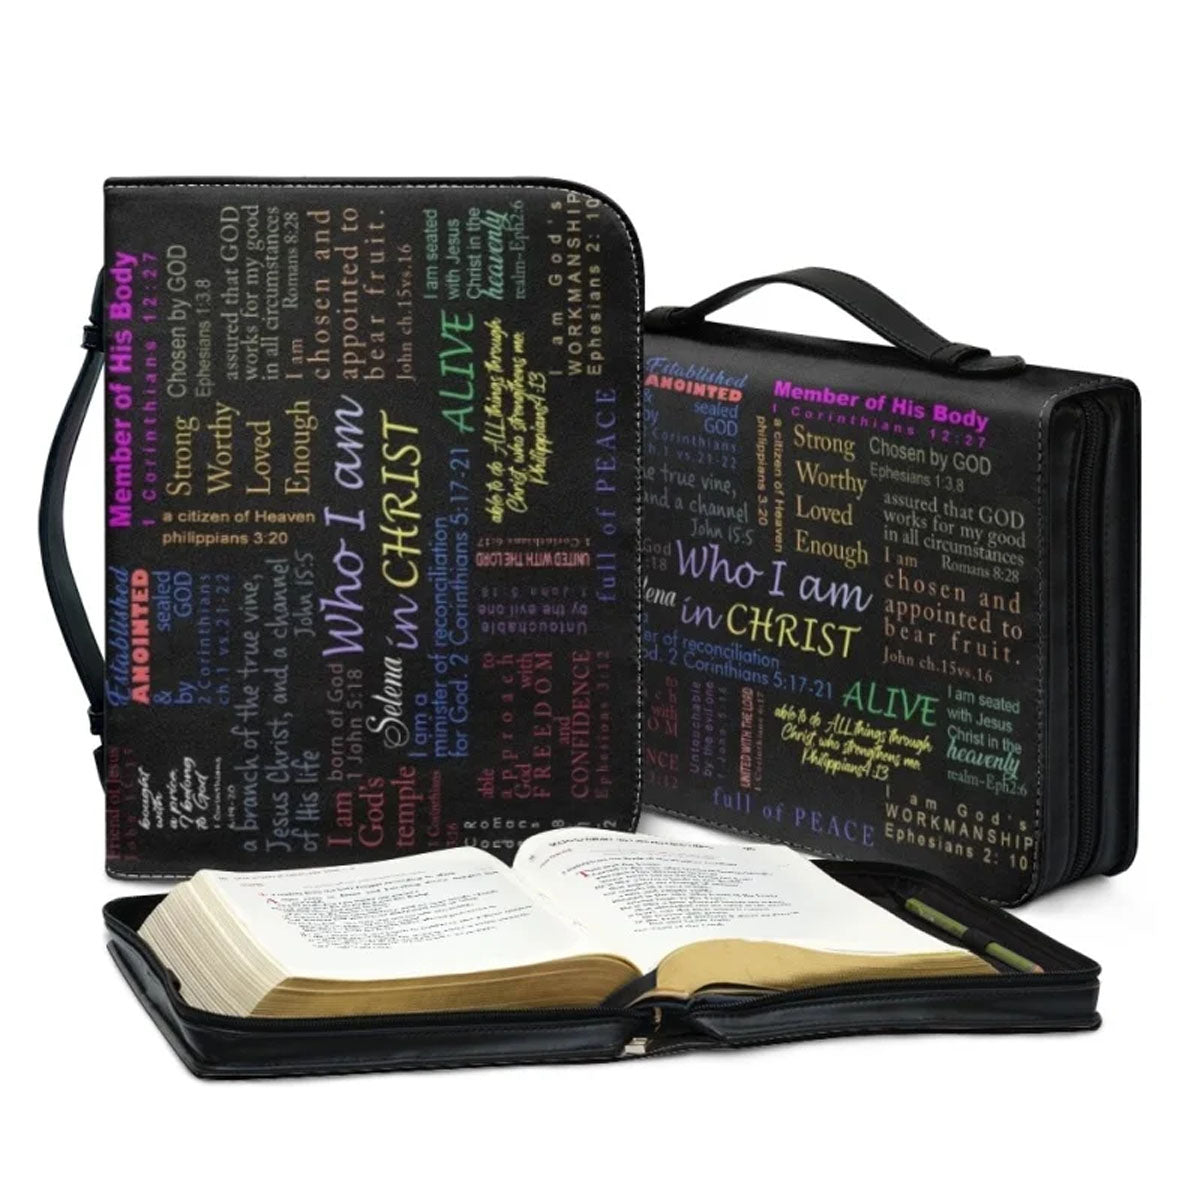 Christianartbag Bible Cover, Who I Am In Christ Bible Cover, Personalized Bible Cover, Mom Bible Cover, Mother Days Gifts, CAB221223. - Christian Art Bag